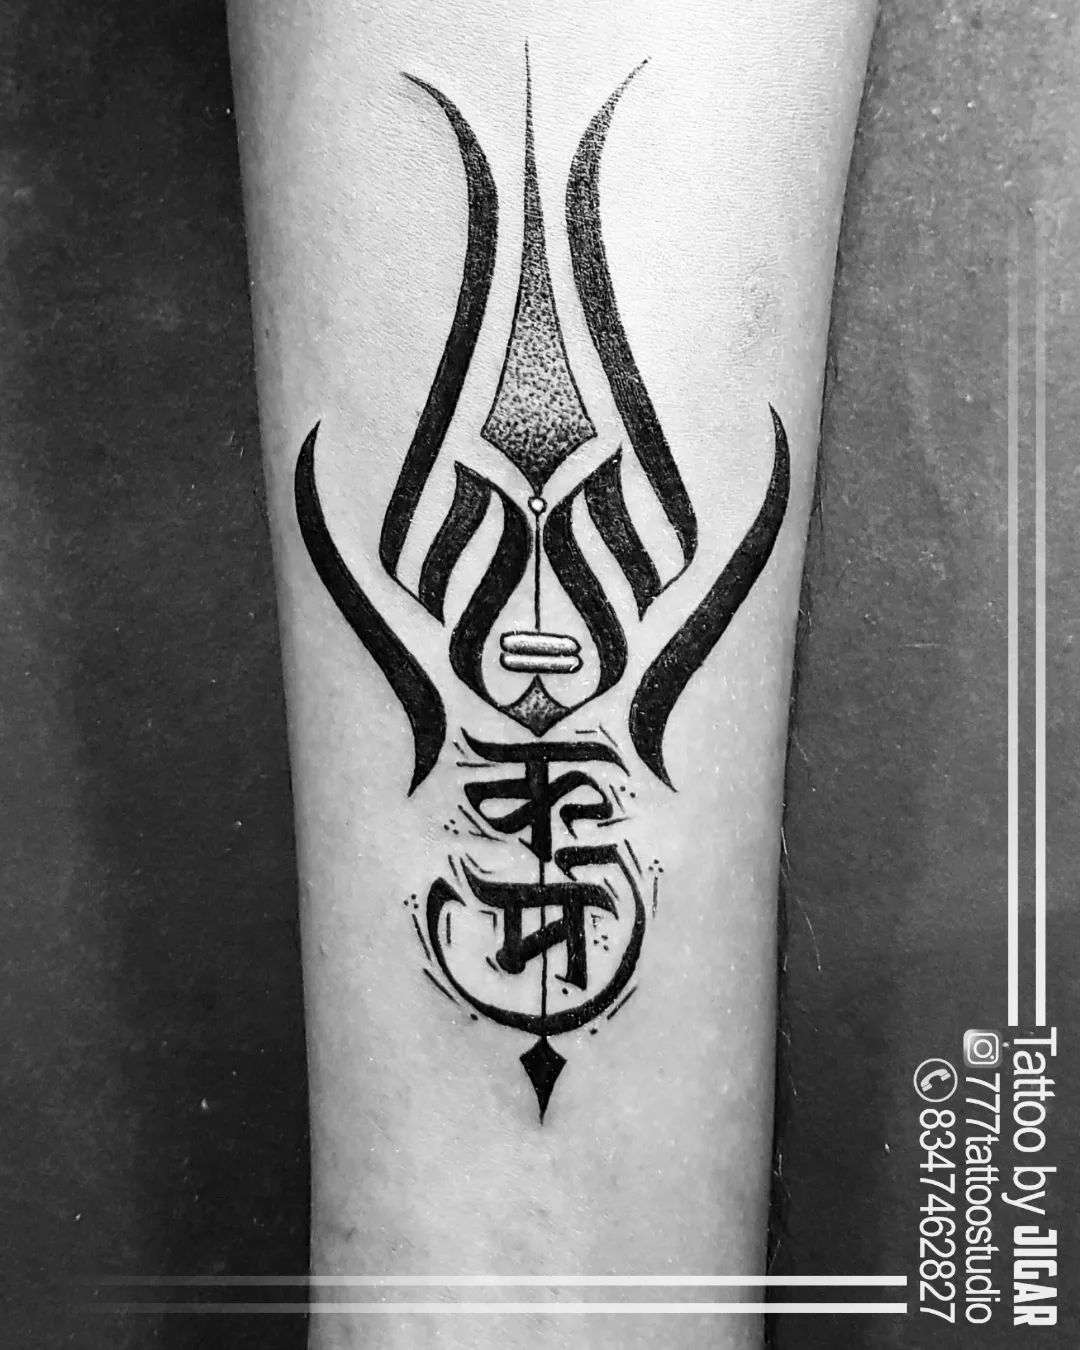 Karma Tattoo In Hindi With Circle Of Life by etishapatel on DeviantArt